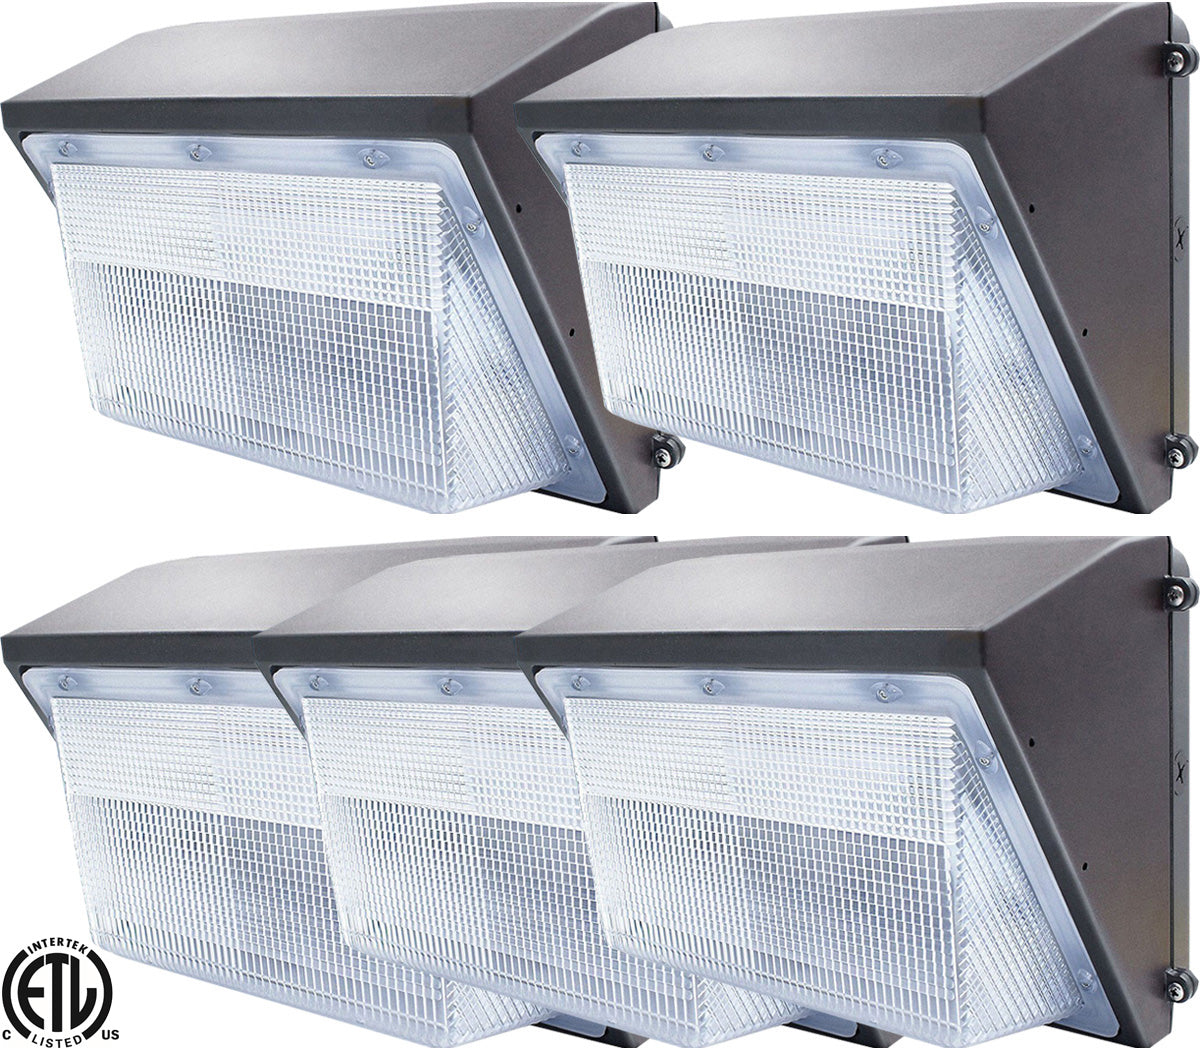 Commercial LED Wall Pack Lights Canada 120w Photocell 5000k 6000k 17210Lm